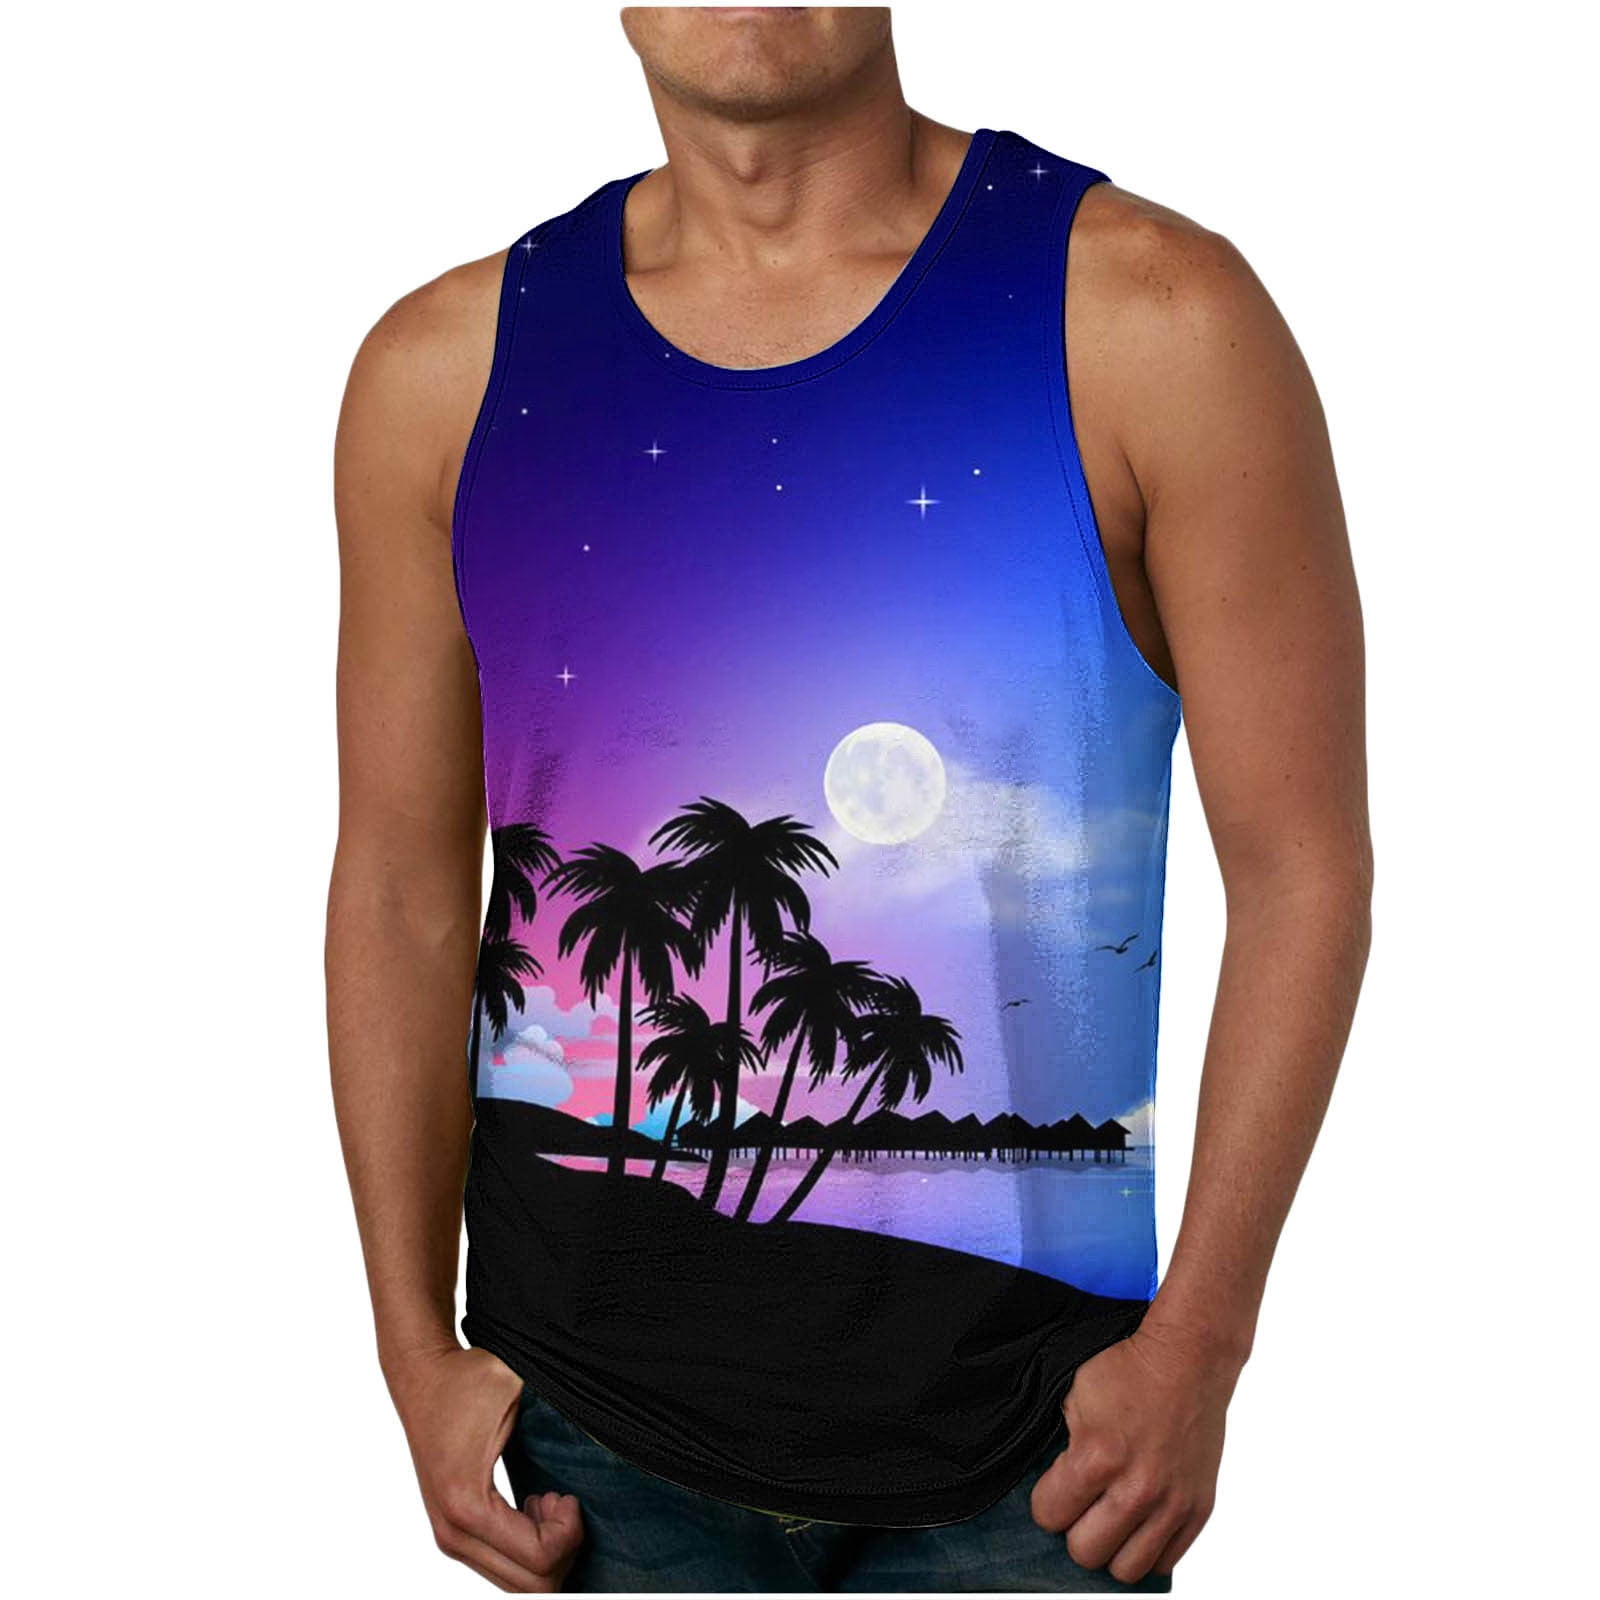 Gaecuw Gym Tanks for Men Hawaiian Summer Camisole Tropical Landscape ...